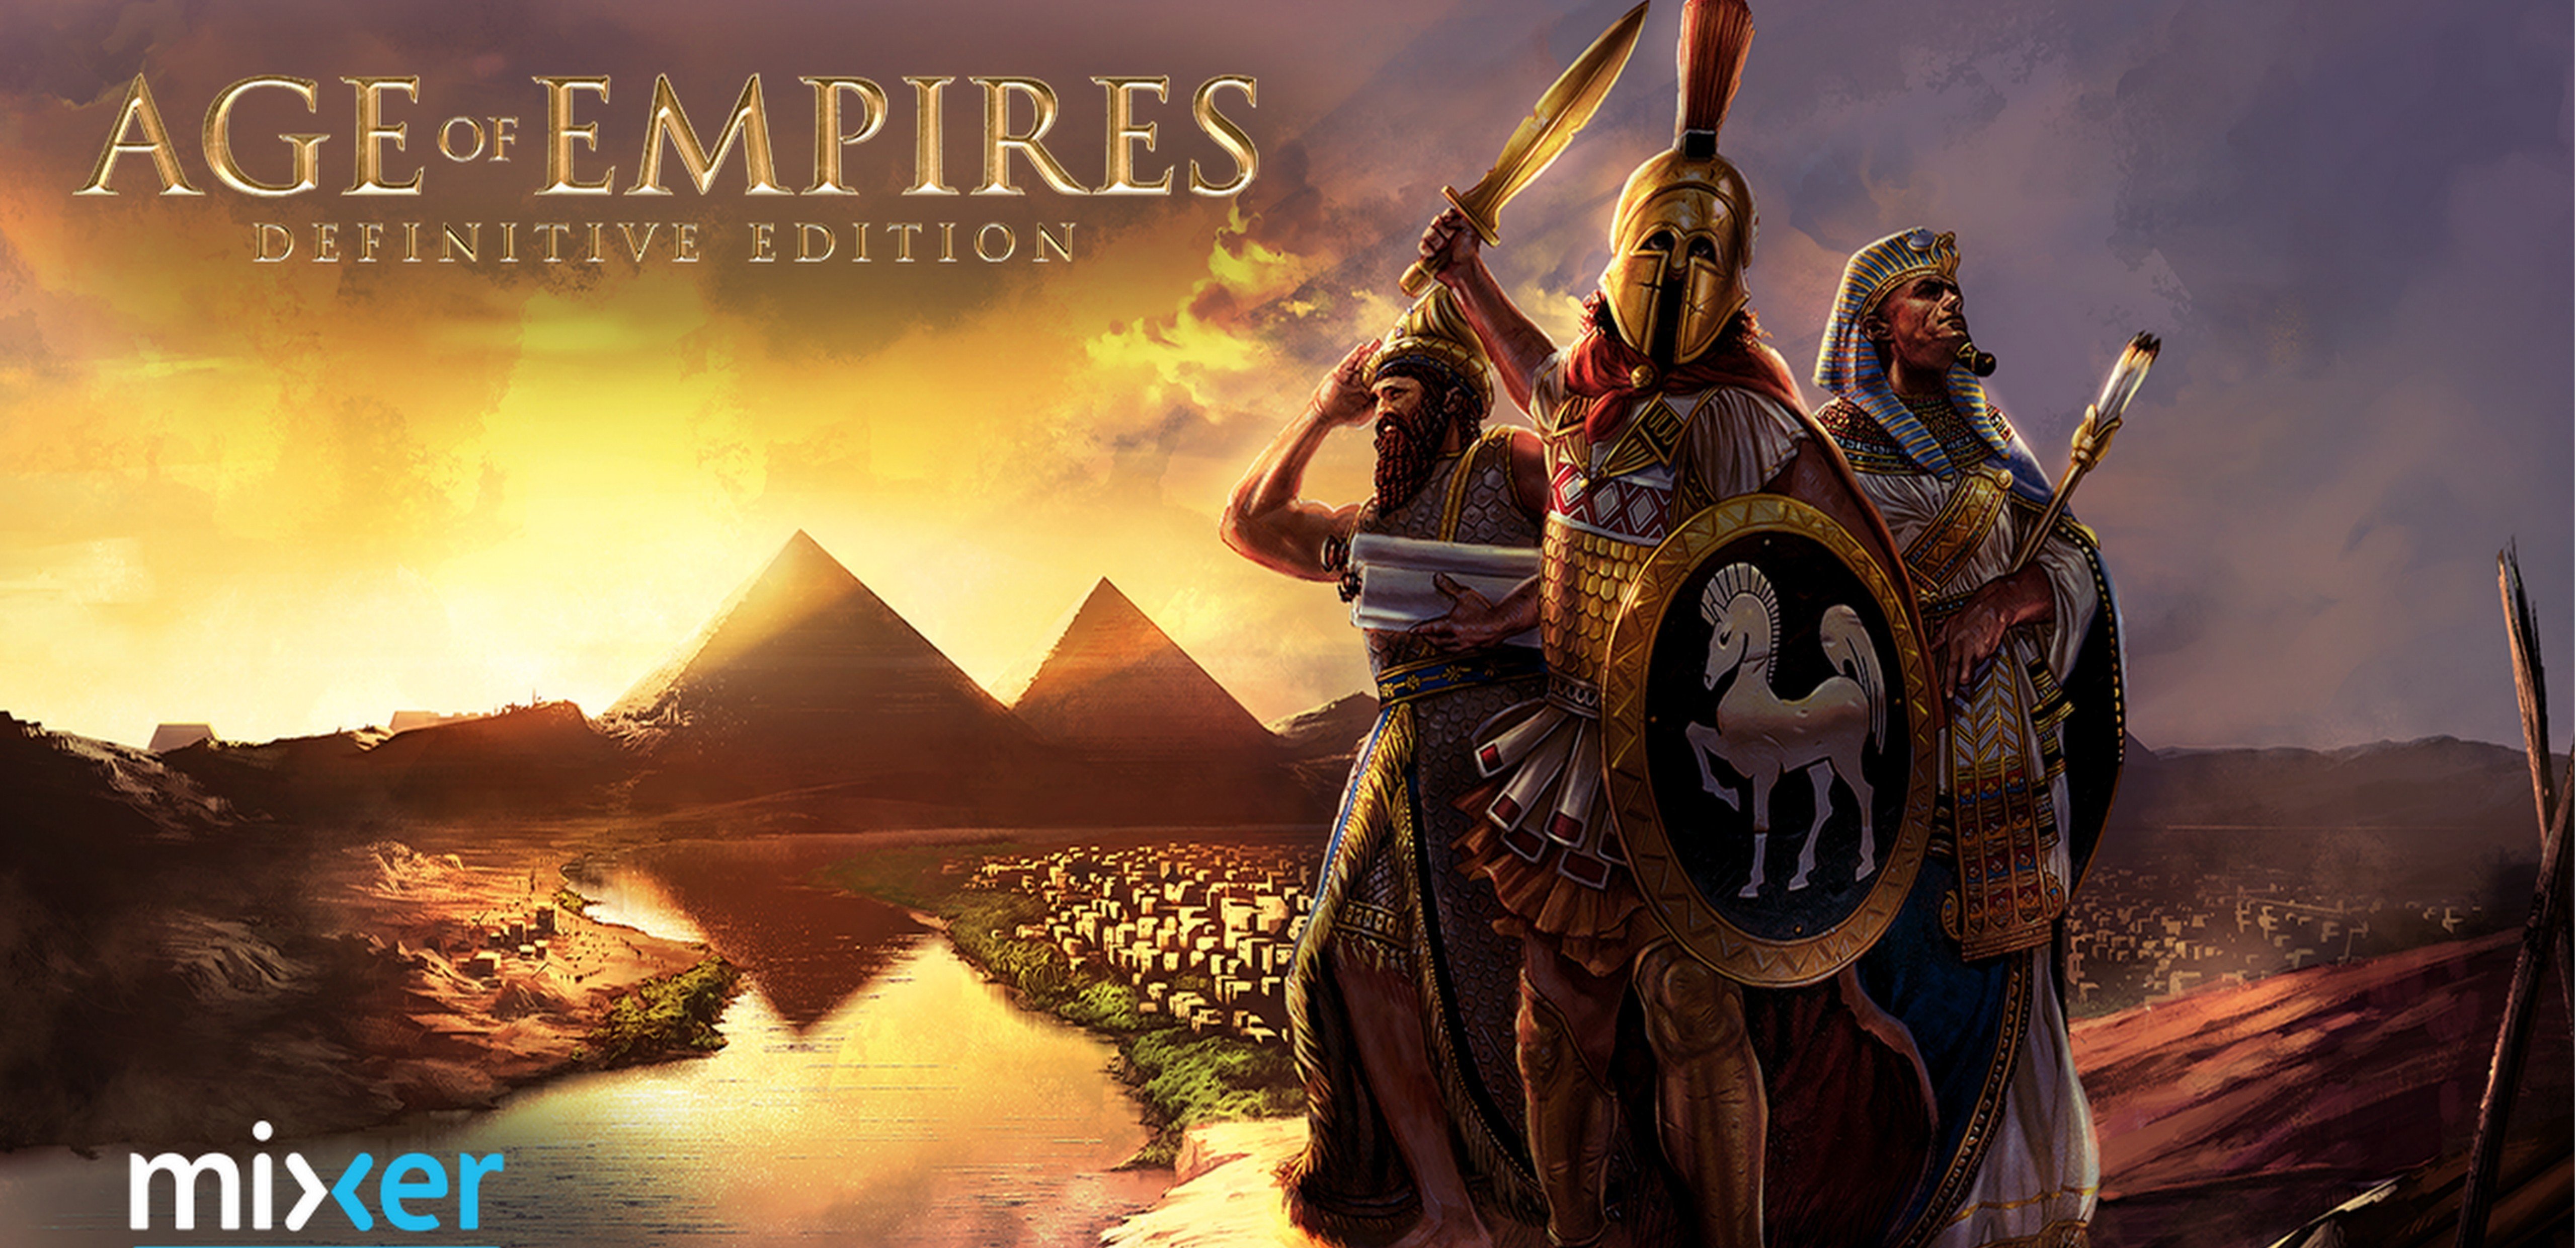 How to watch the Age of Empires: Definitive Edition Mixer Livestream on Feb. 19. Windows Experience Blog